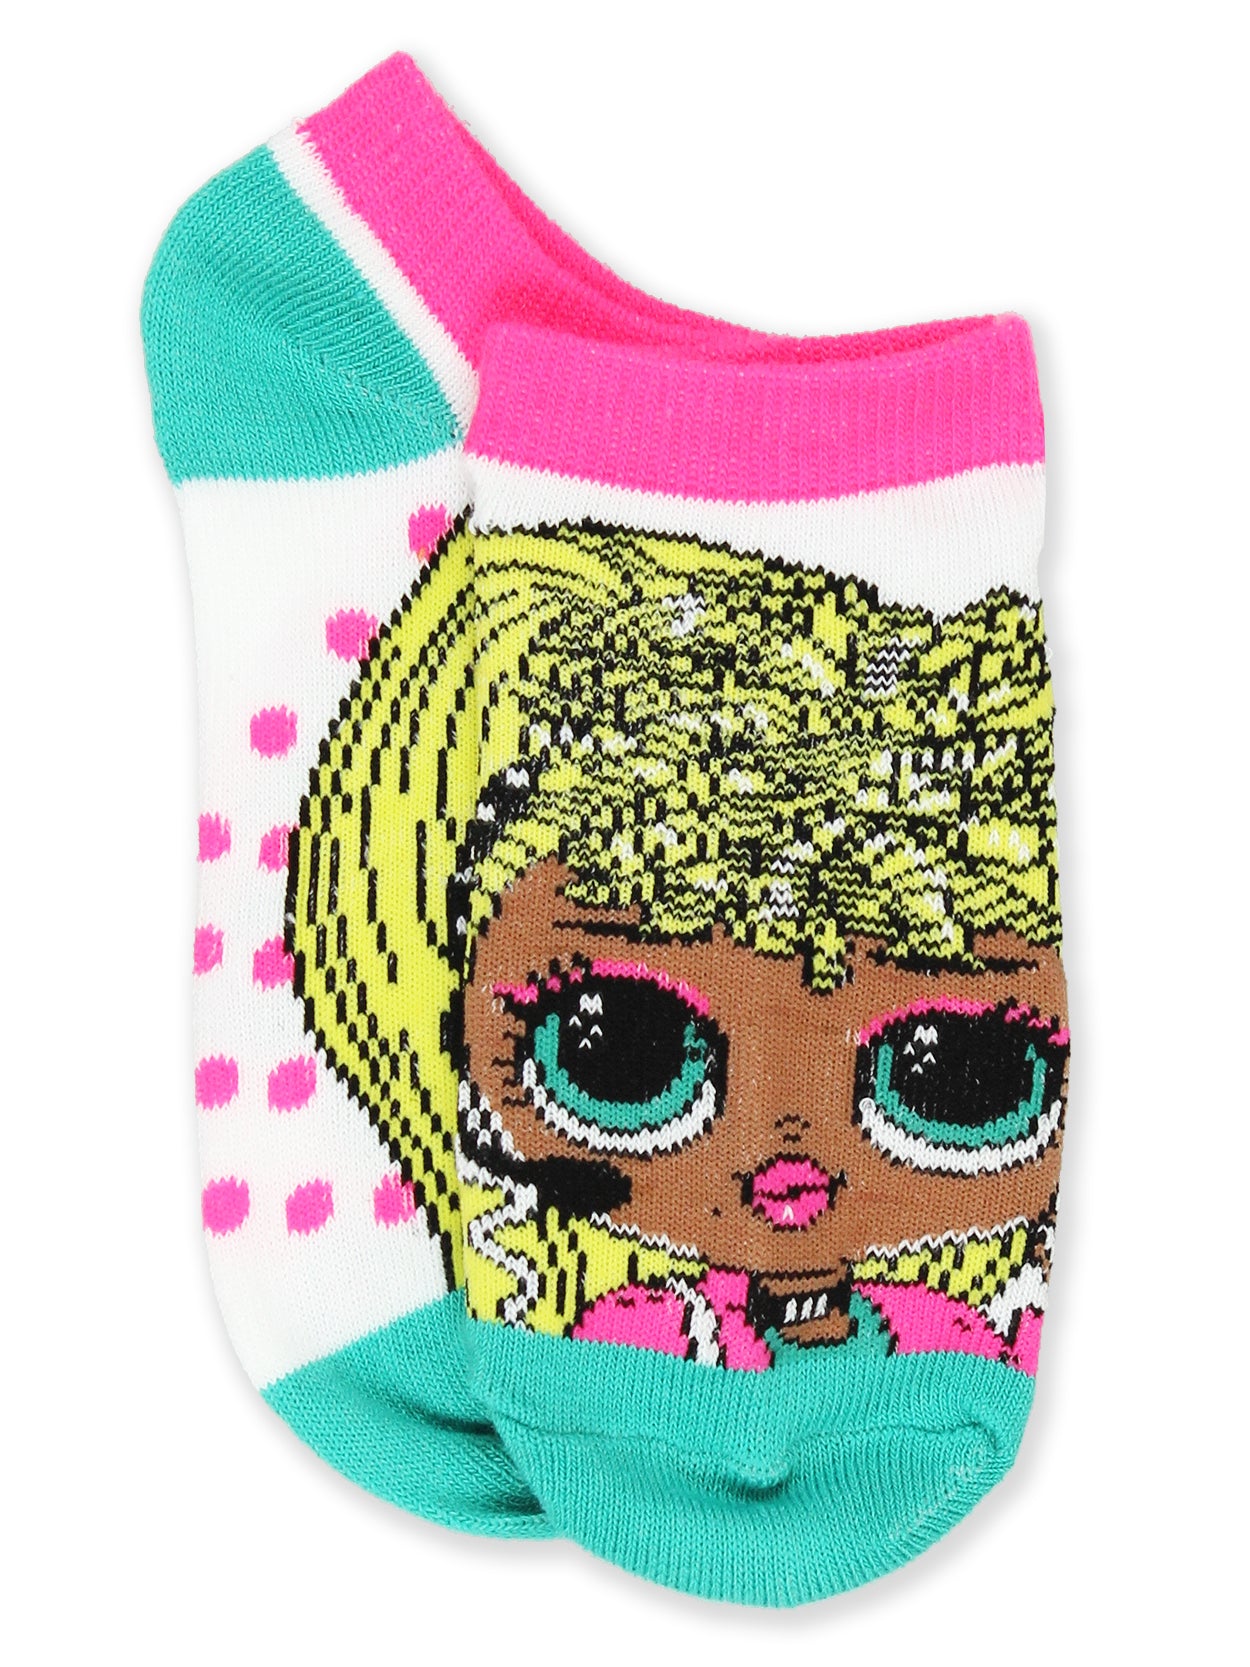 LOL Surprise!™ OMG. Dolls Check It Out No Show Socks 5 Pack